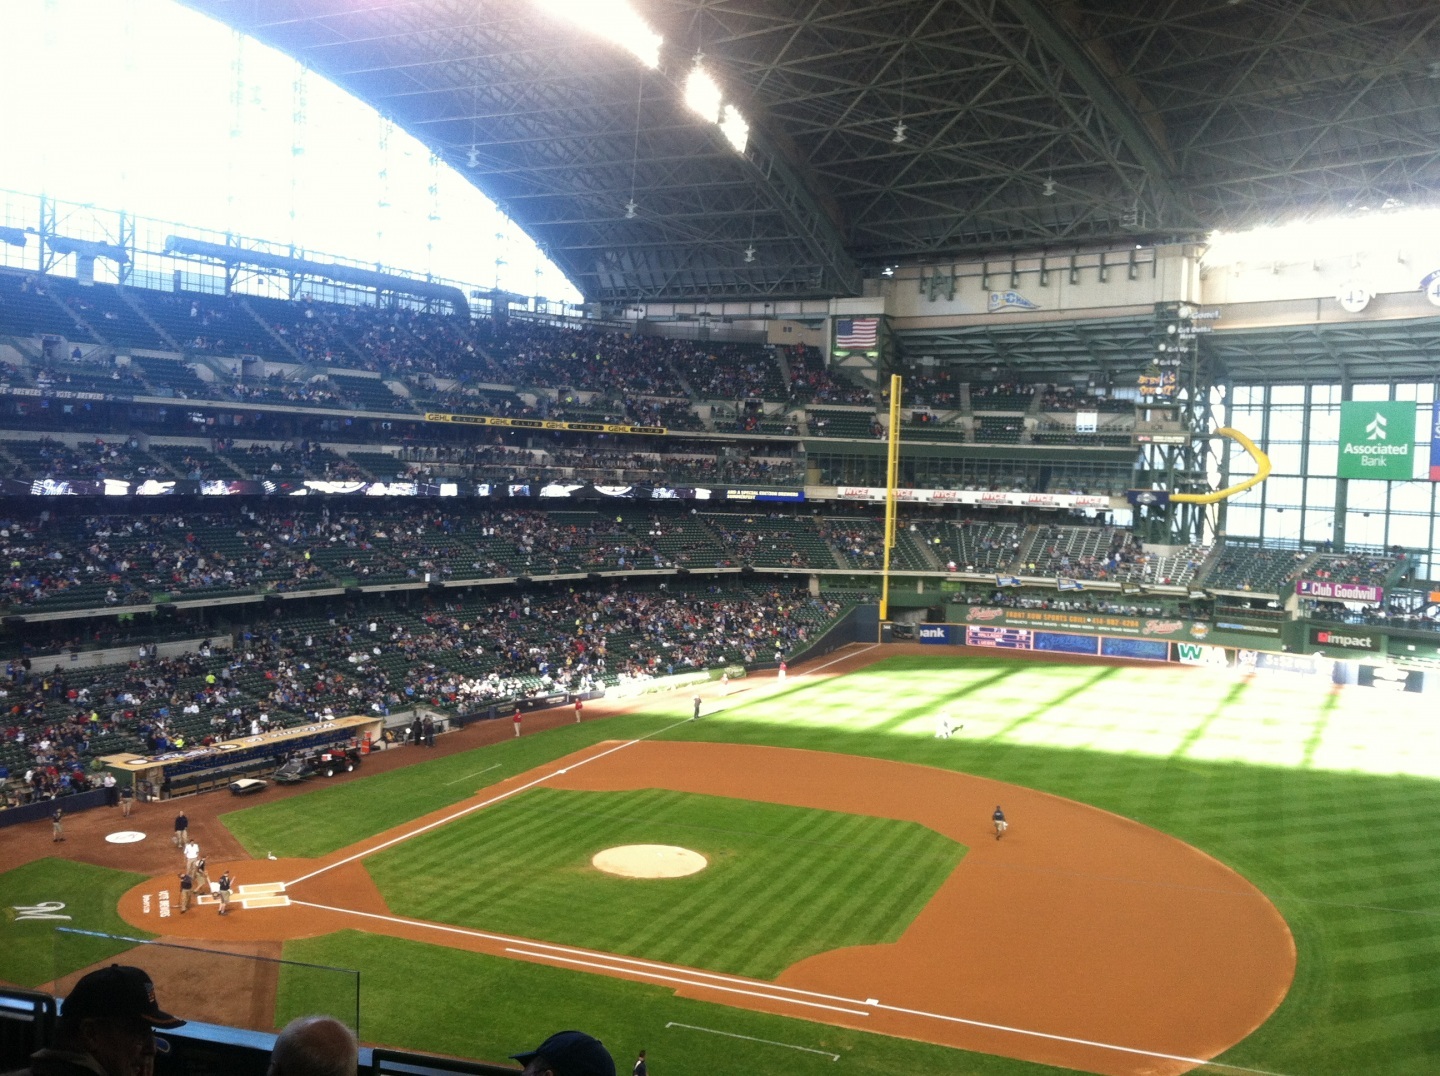 Img Roof Closed Safeco Field Photo Shared By Laney Fans Share Image